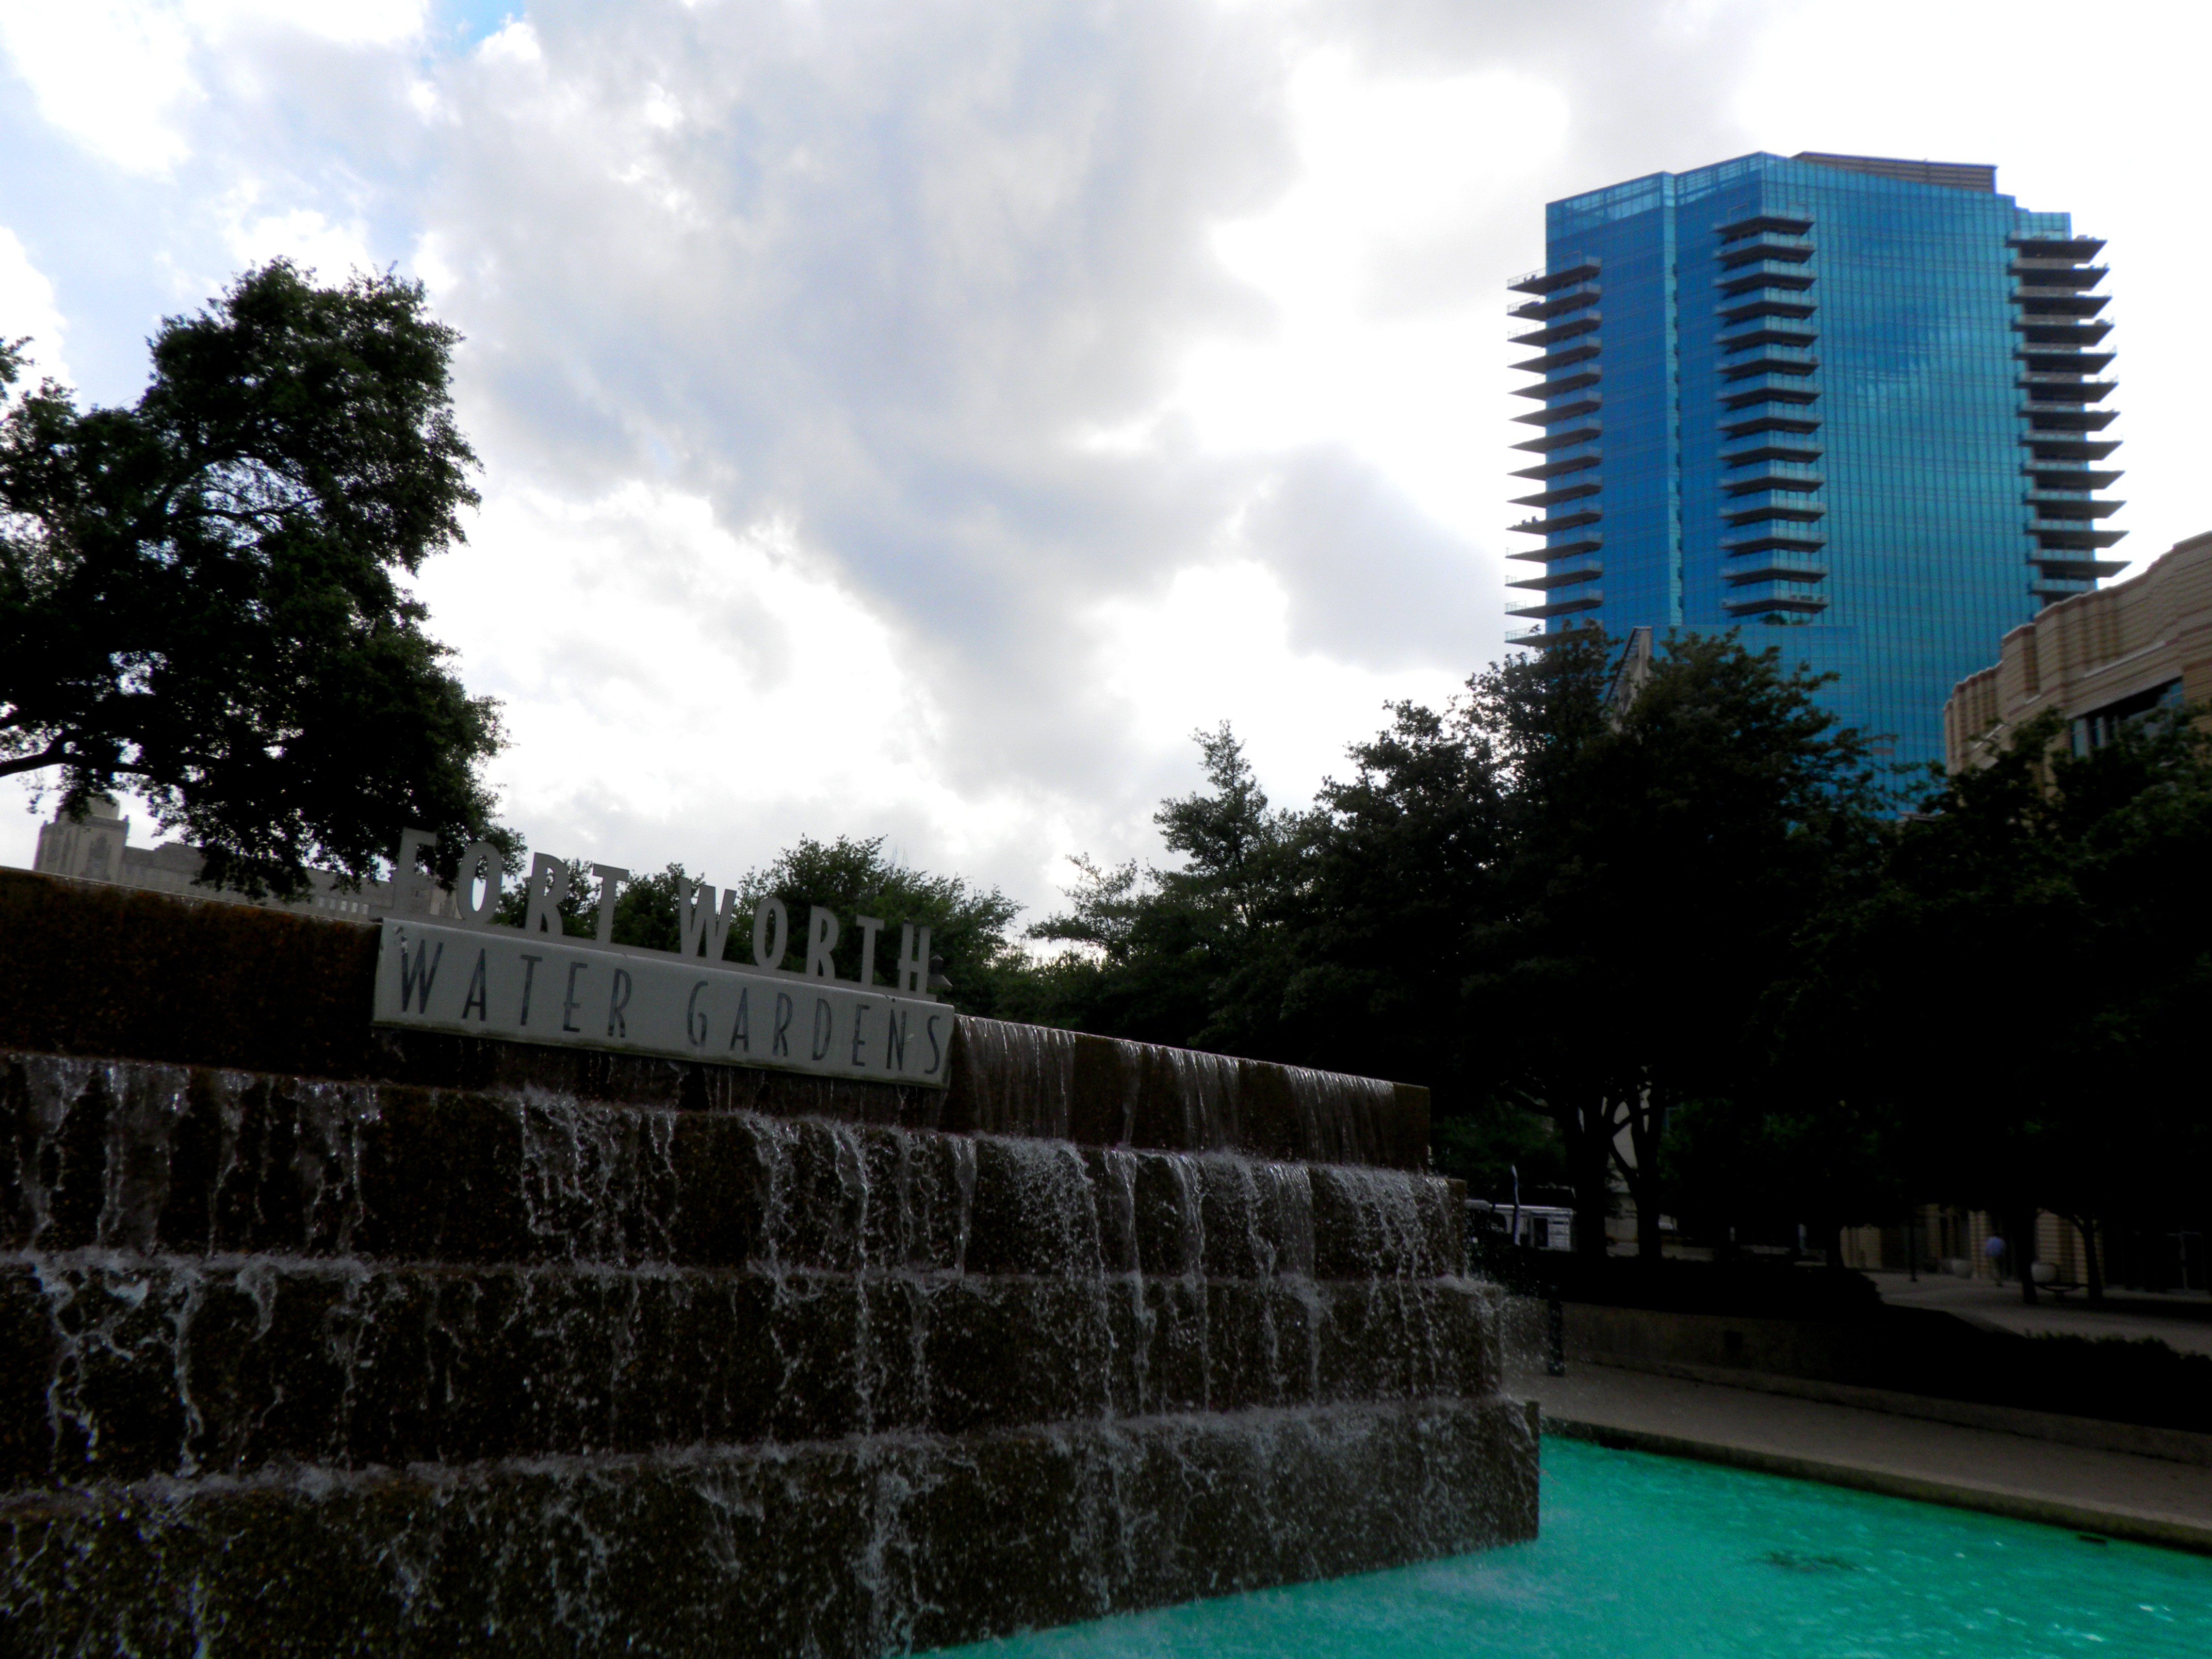 Fort Worth S Water Gardens An Oasis Amid A Concrete Jungle